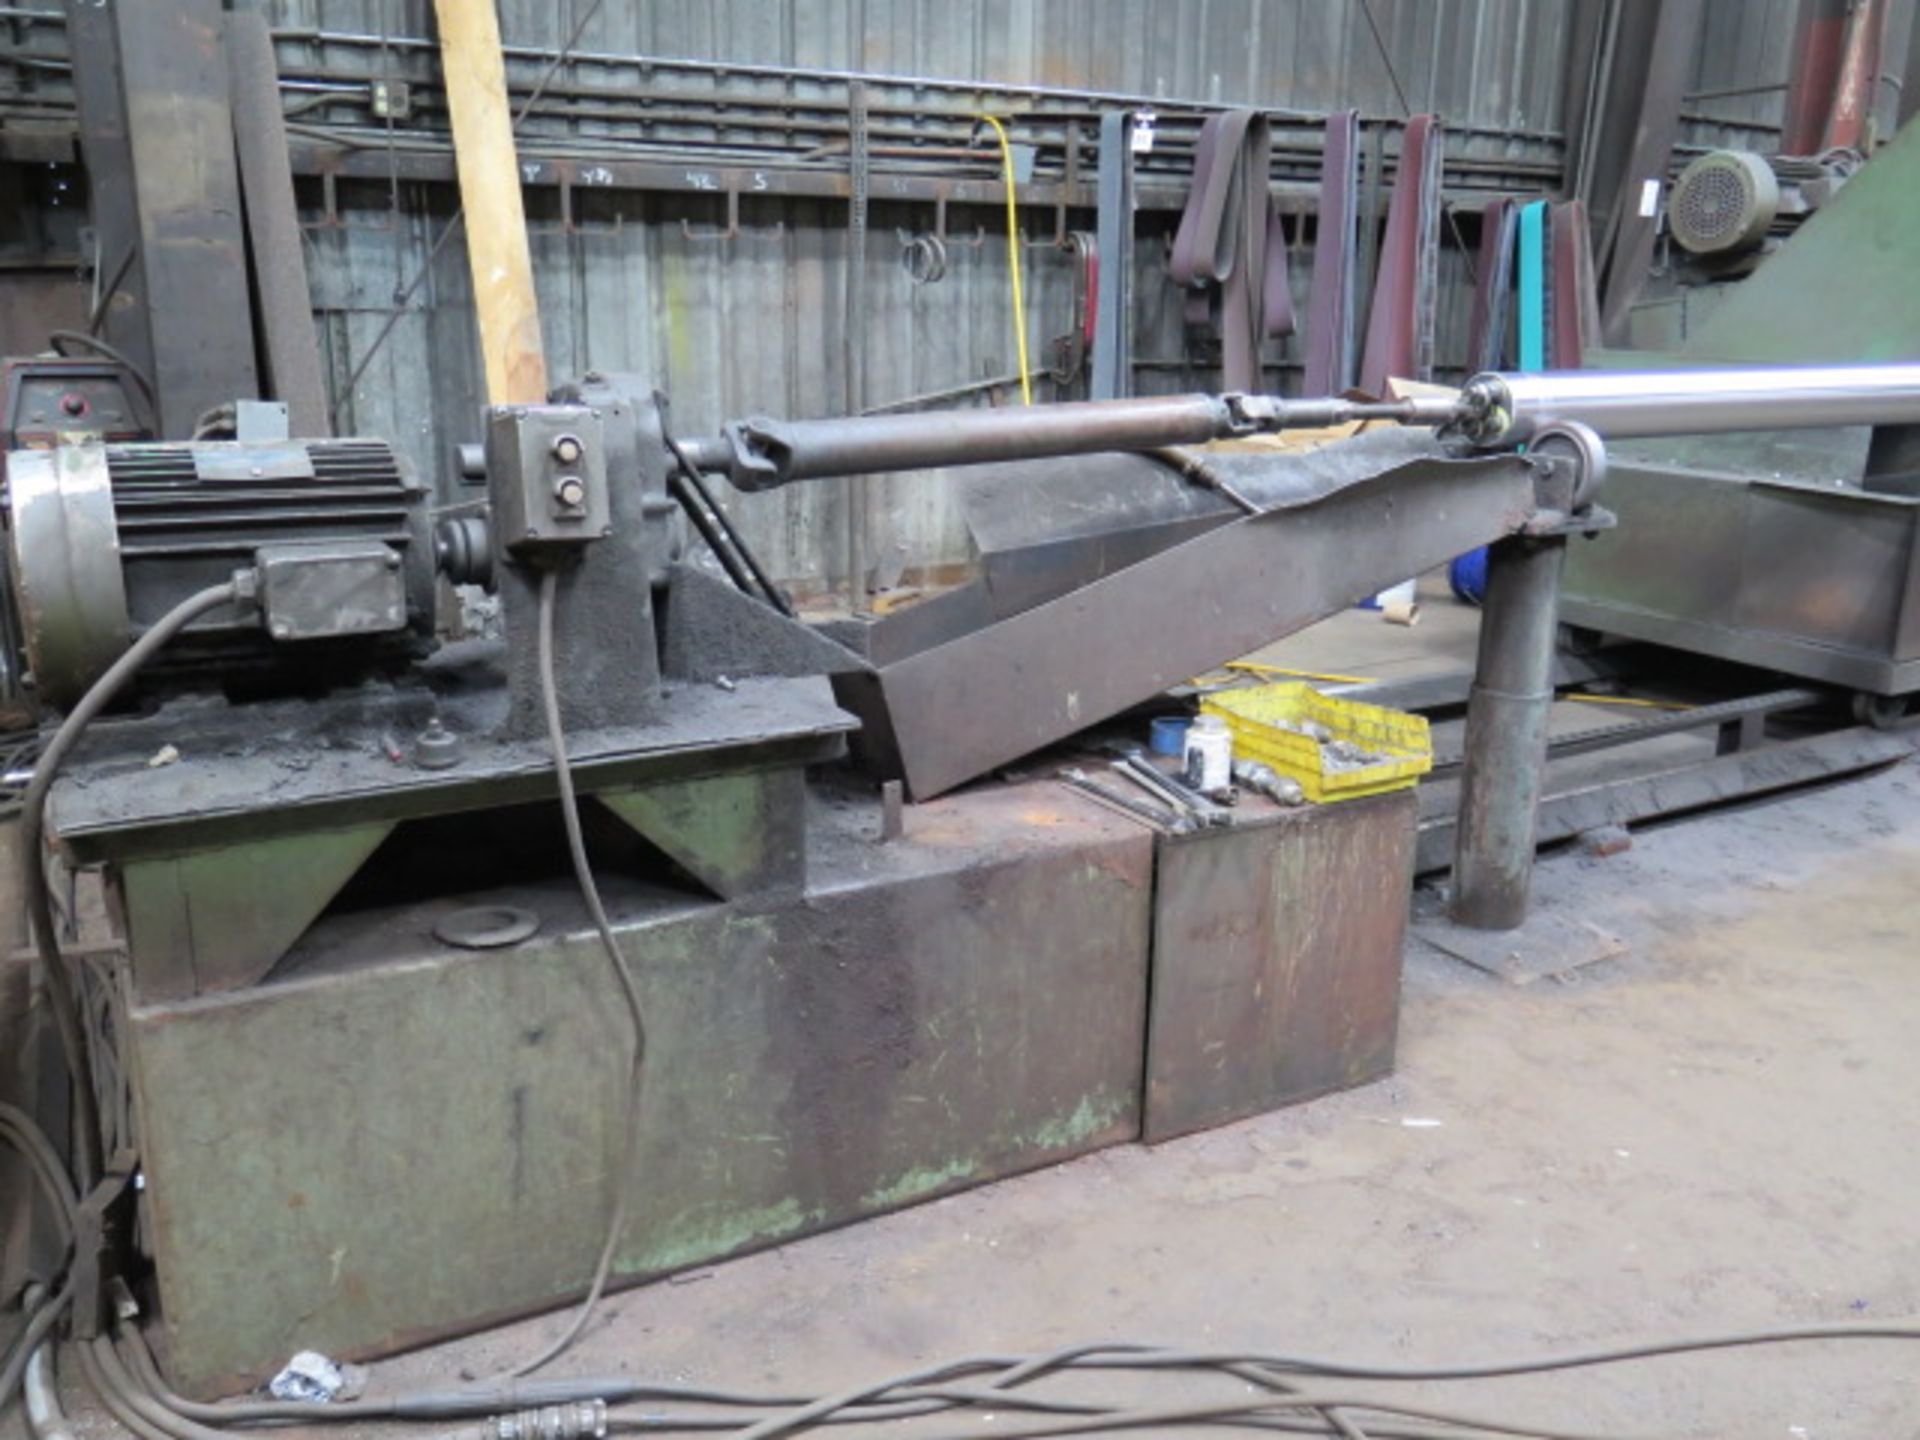 Custom Pipe Grinding Machine w/ 4” Belt Sander, Power Rotational Feed, Approx 60’ Length, SOLD AS-IS - Image 10 of 12